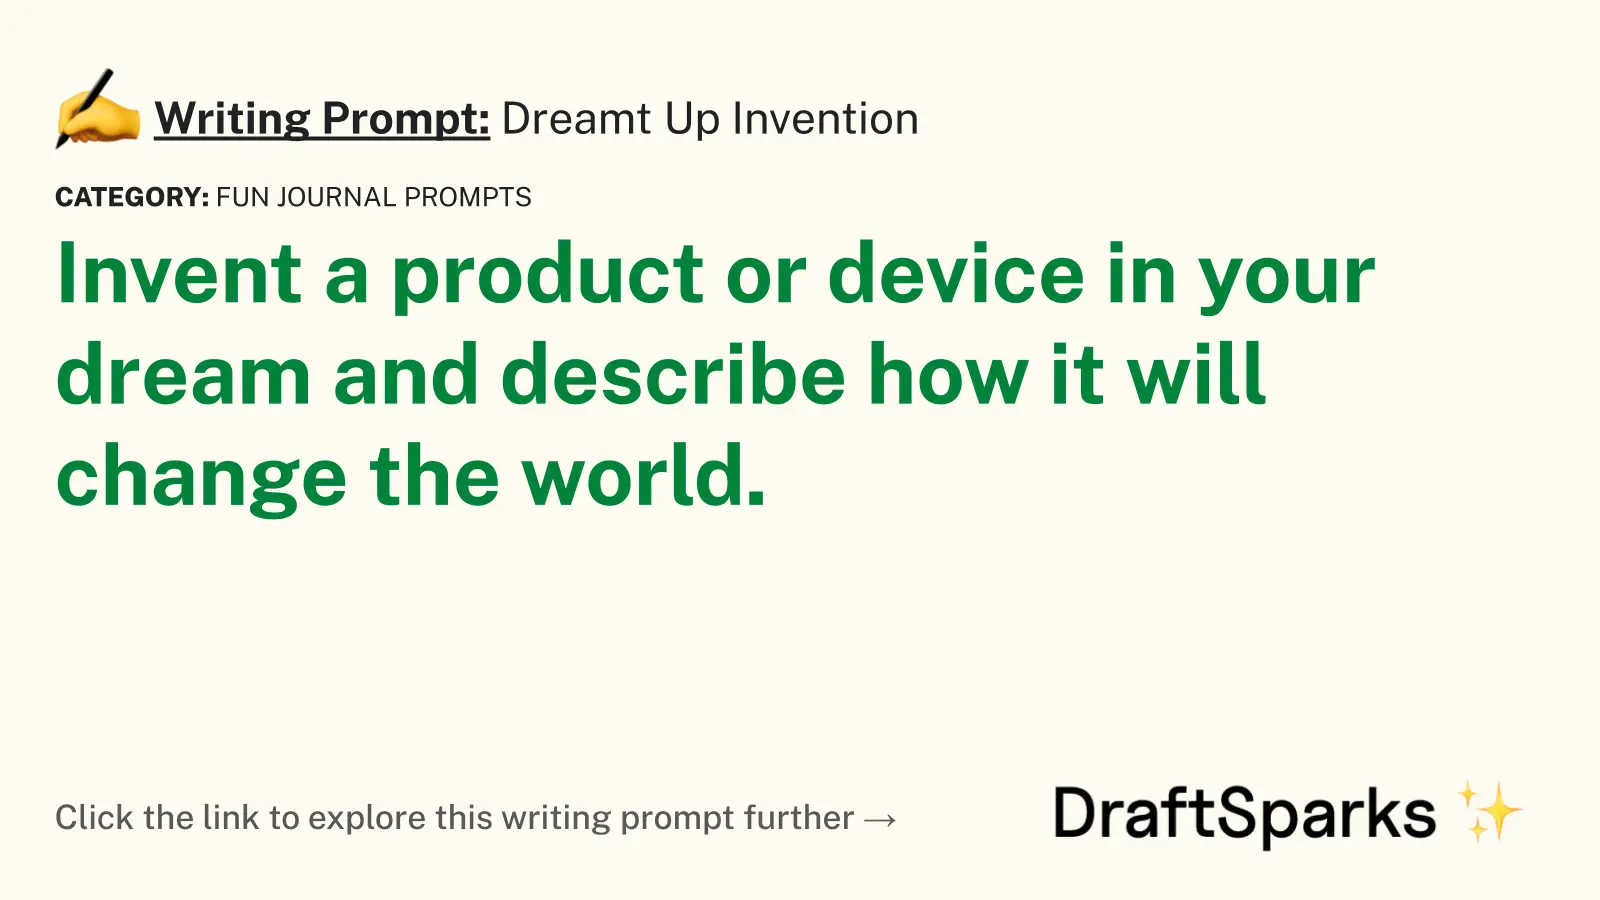 Dreamt Up Invention